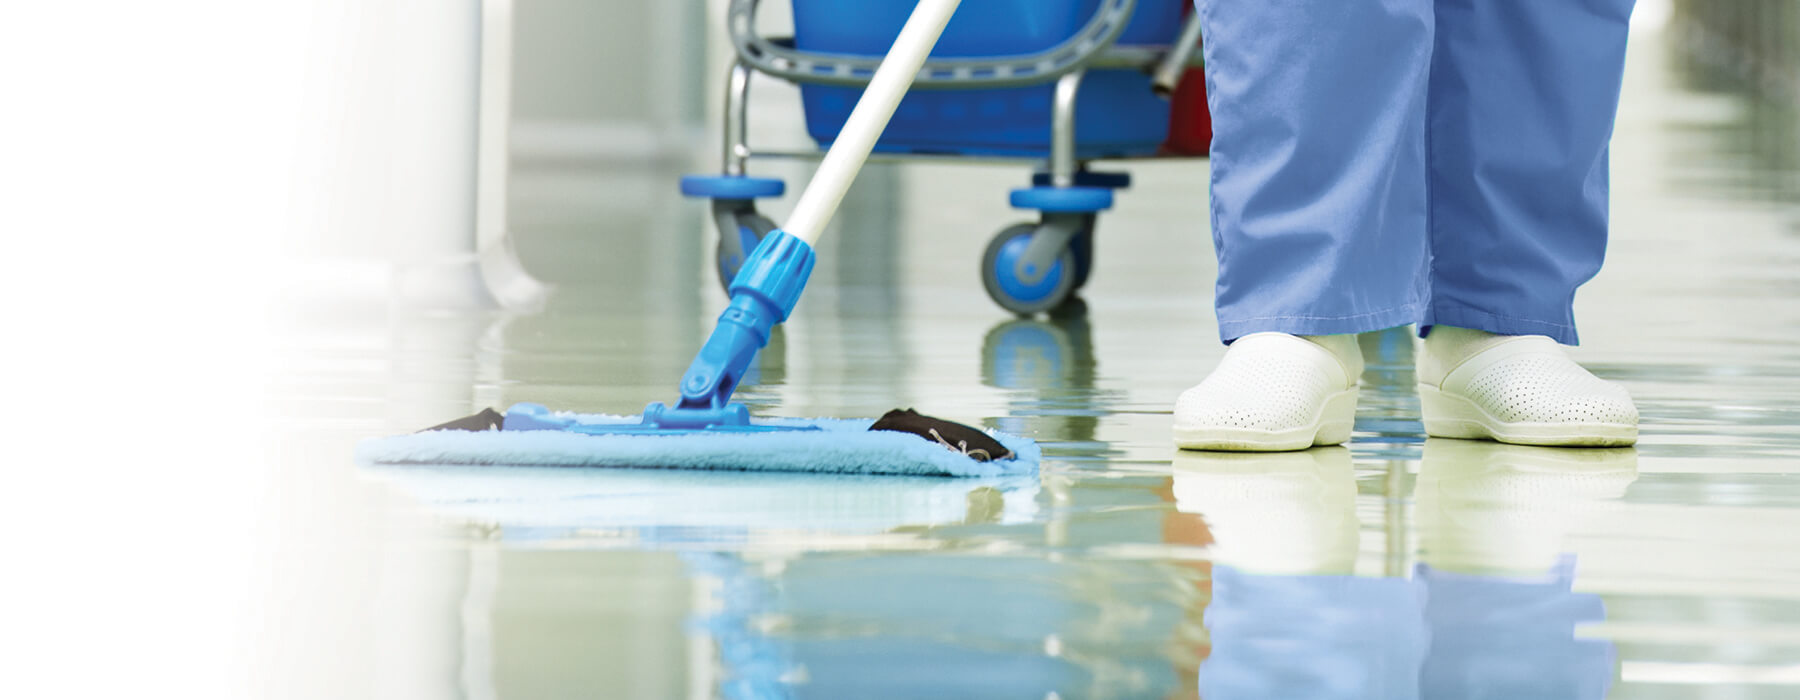 Fewer injuries, improved cleaning properties thanks to a new mop